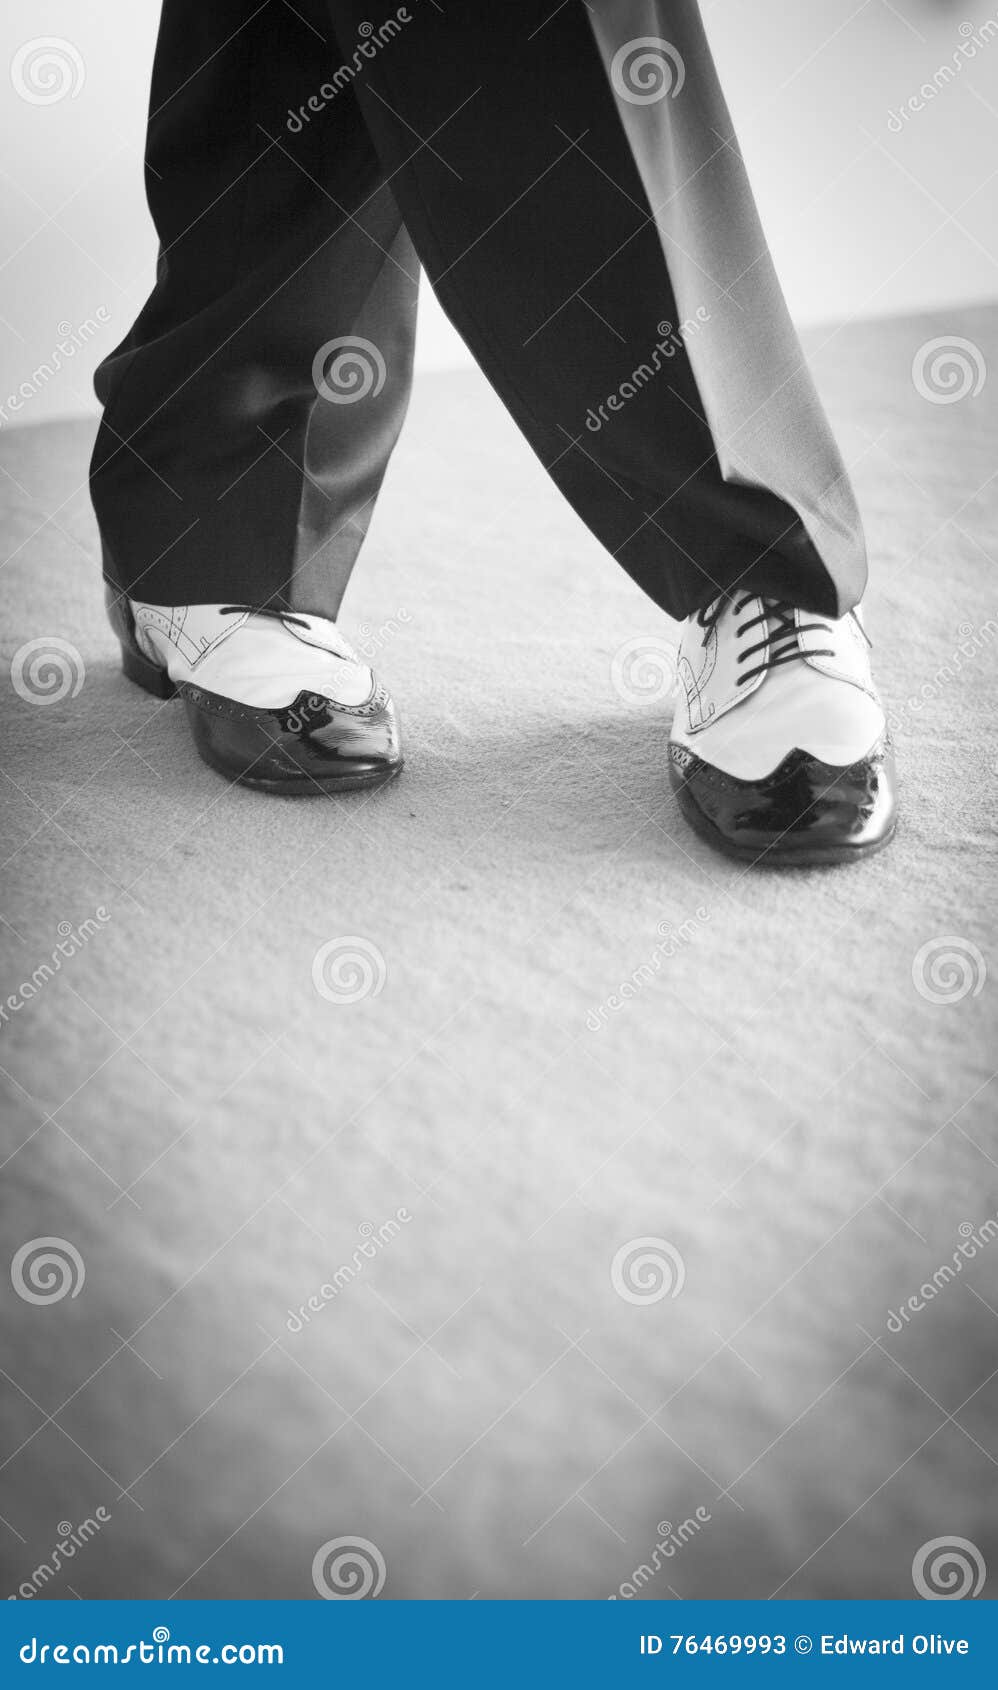 Male dancer dancing shoes stock image. Image of movement - 76469993